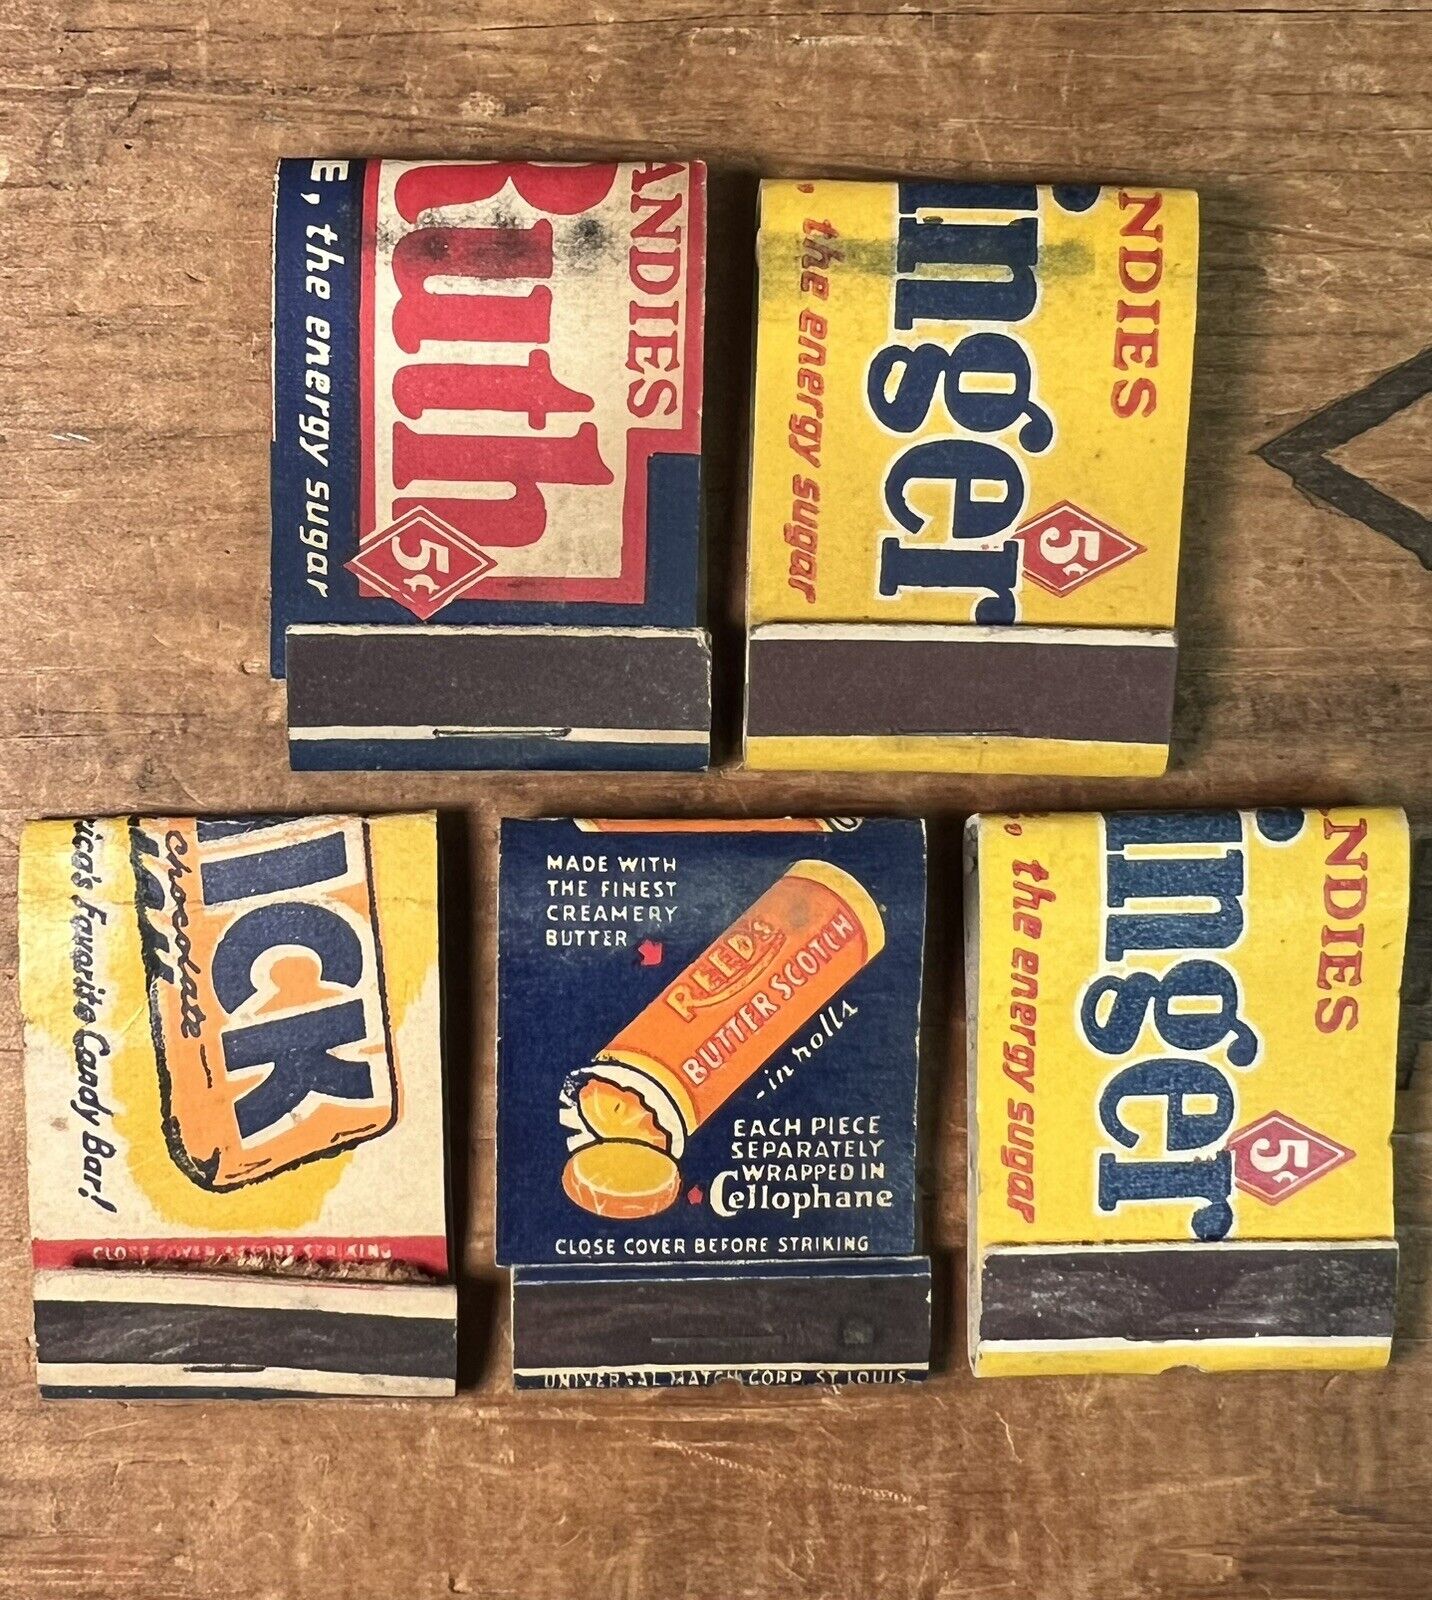 2 Unstruck 1930s Butterfinger & Baby Ruth Matchbooks + 3 Used Candy Matchbooks 